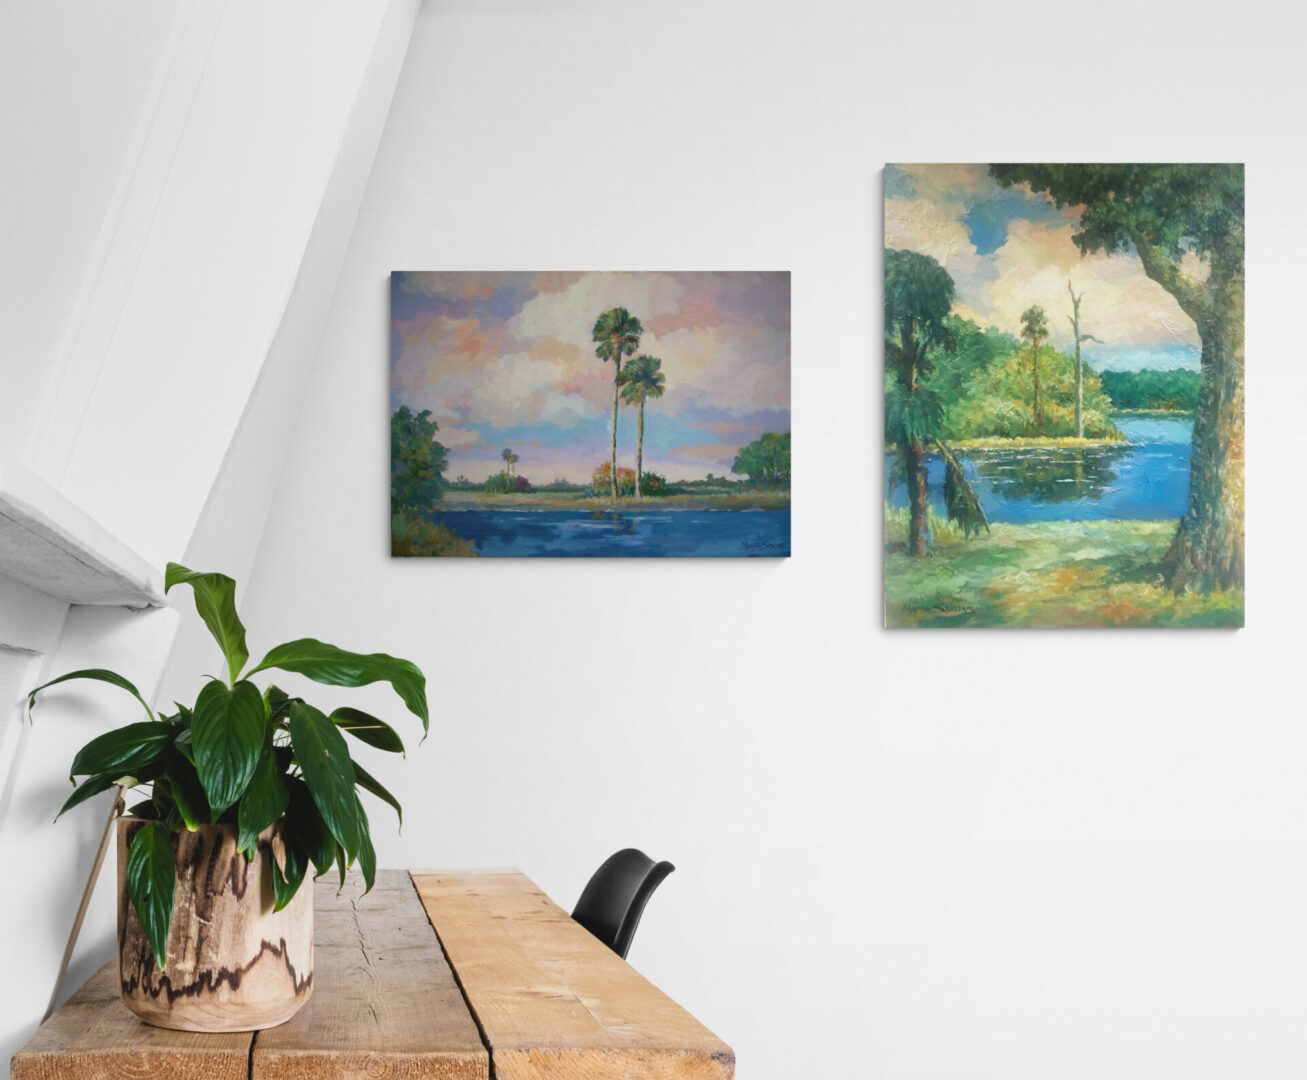 Two local fine art paintings hanging on the wall of a room, available for sale.